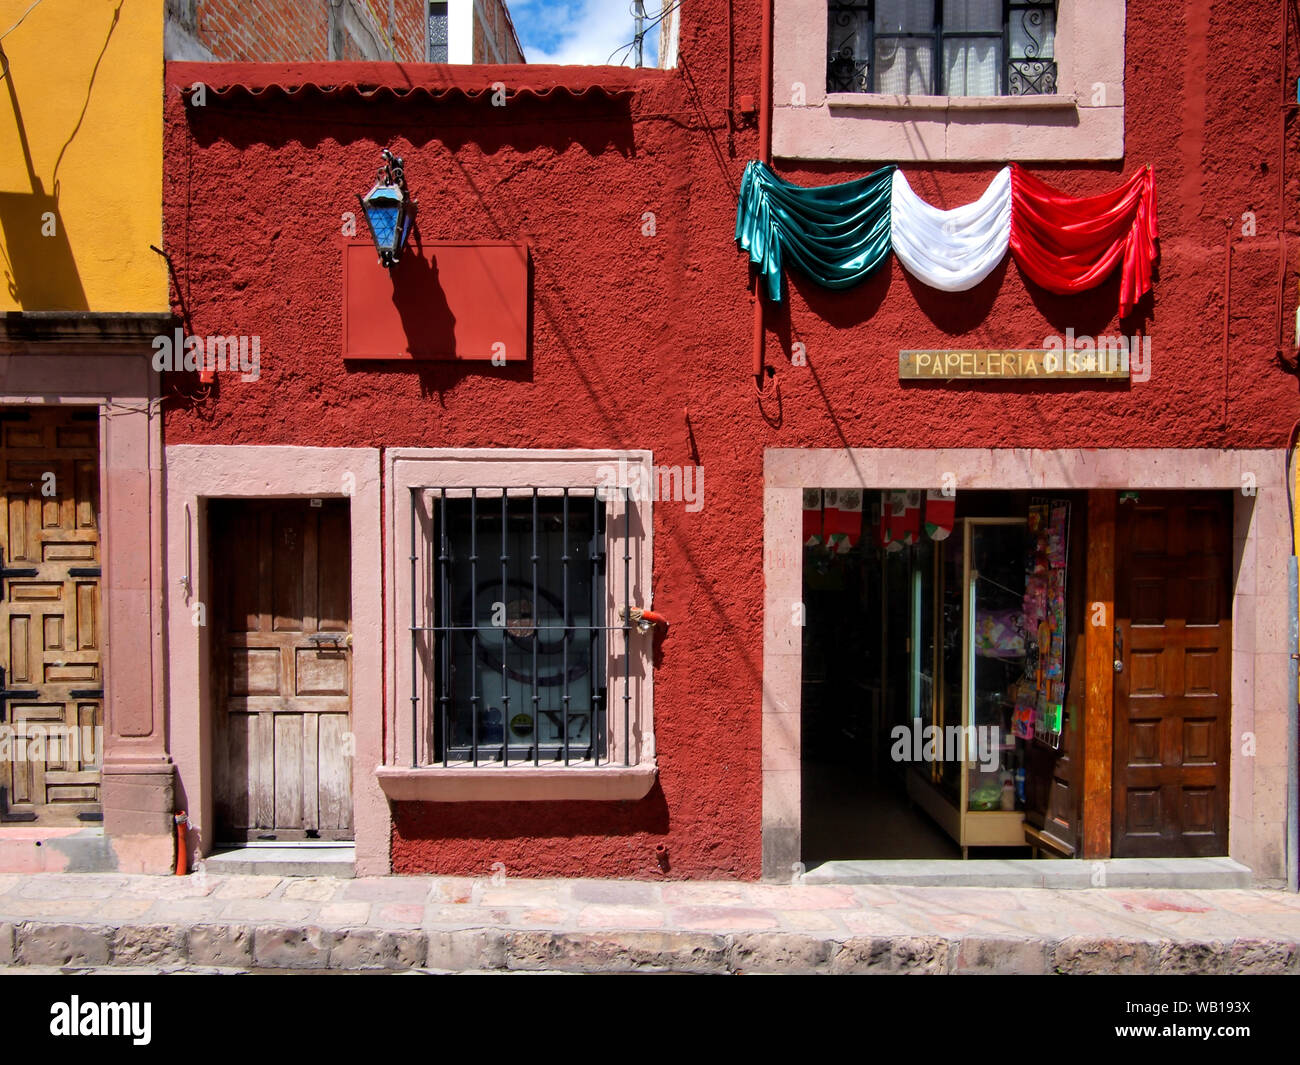 San Miguel De Allende, a city and municipality in the region of Guanajuato in central Mexico.  The historic town centre is a World Heritage Site. Stock Photo